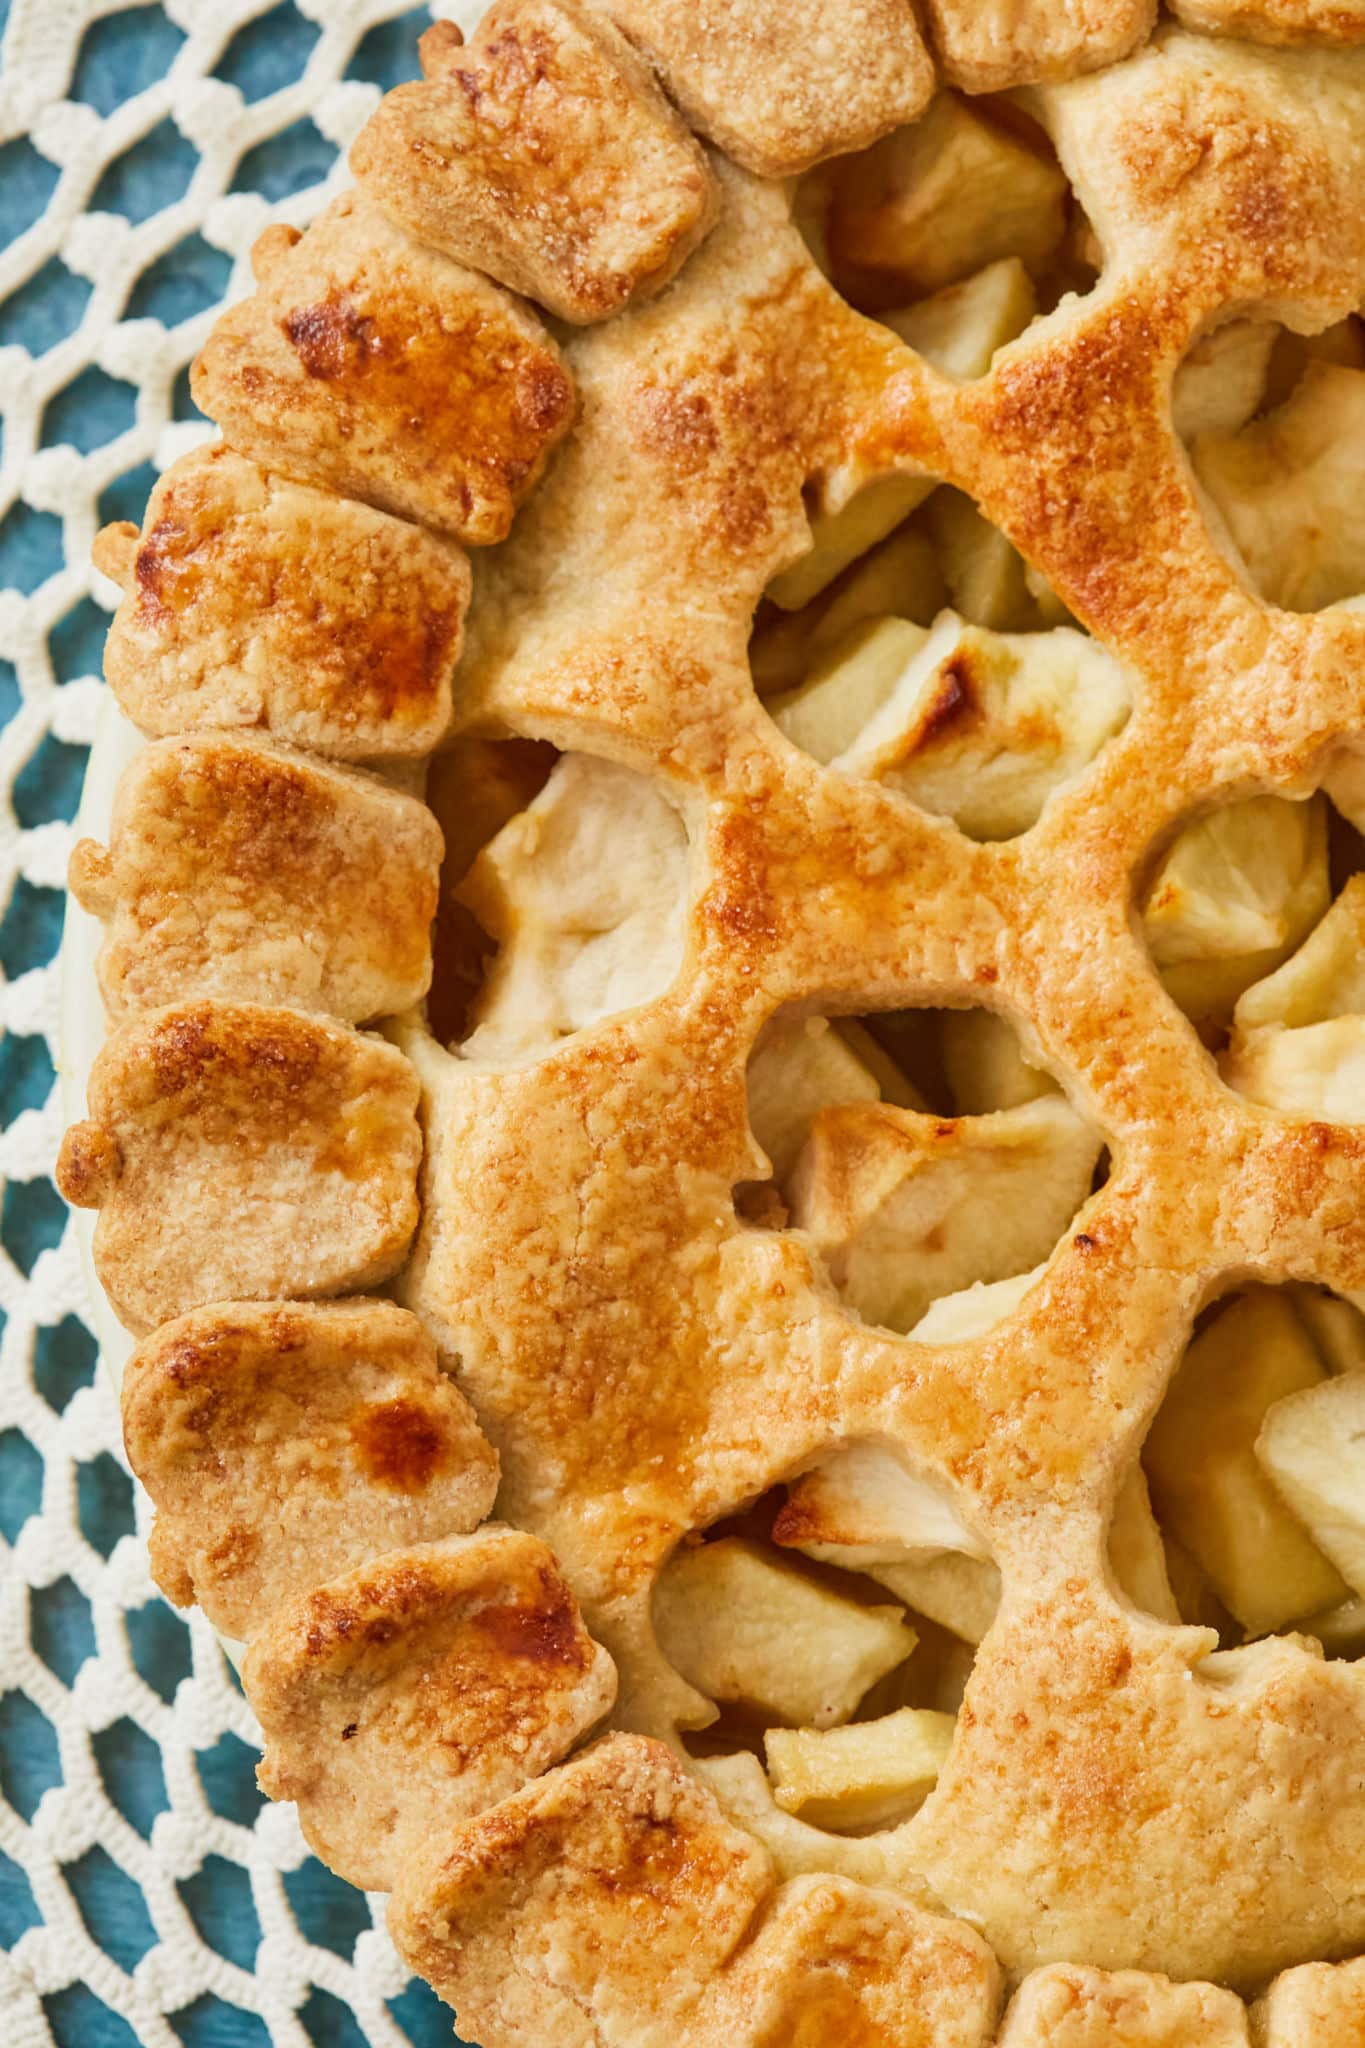 A close up of the classic apple tart crust after baking.